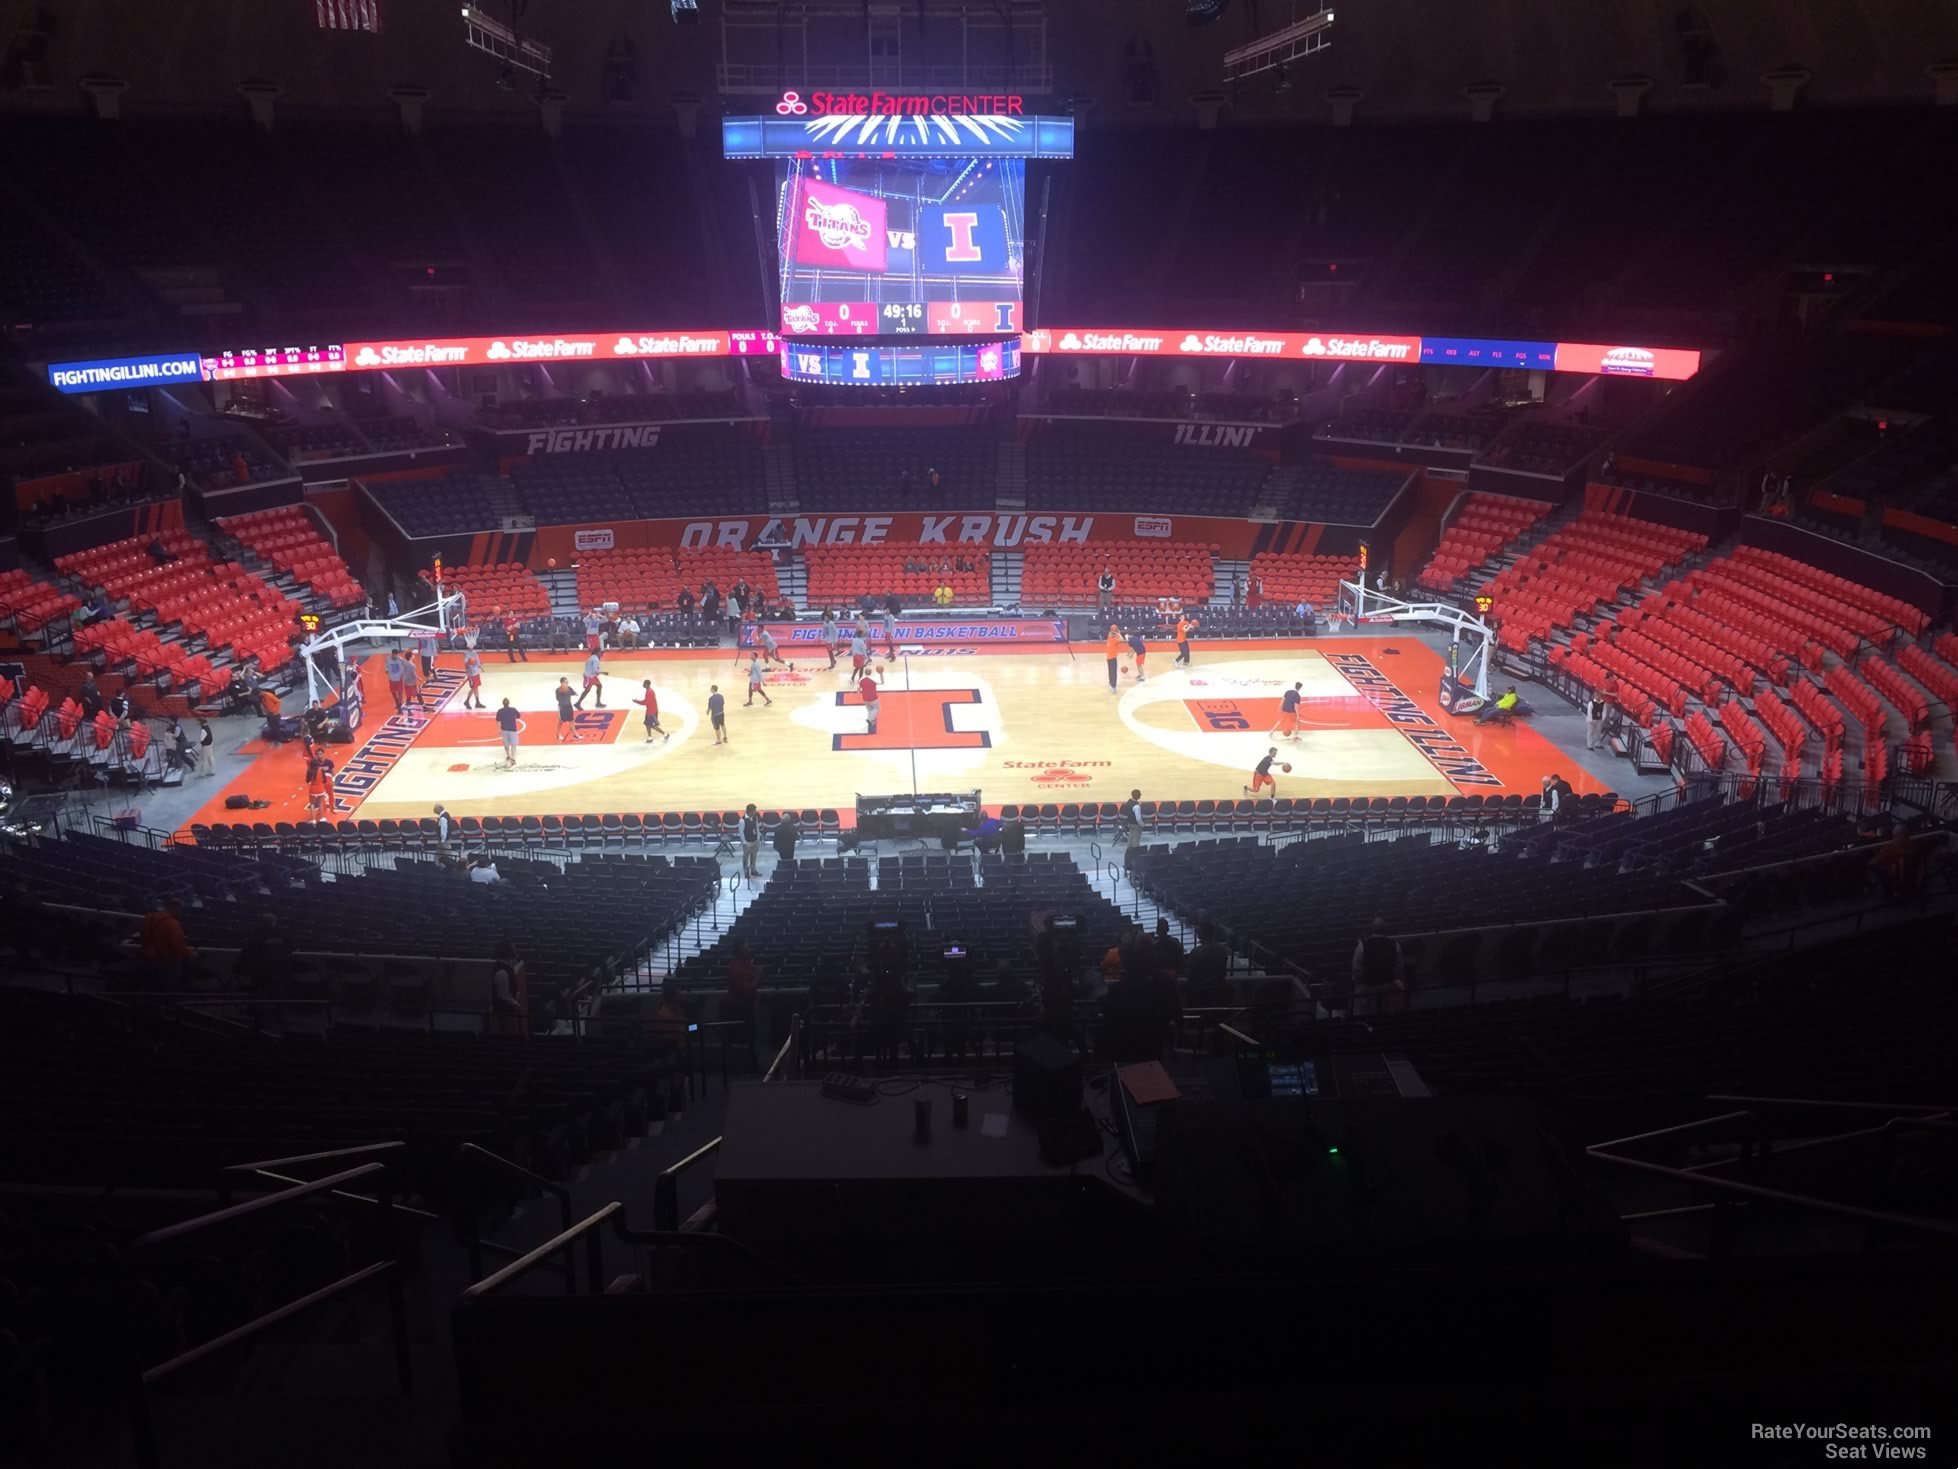 section 201, row 10 seat view  - state farm center